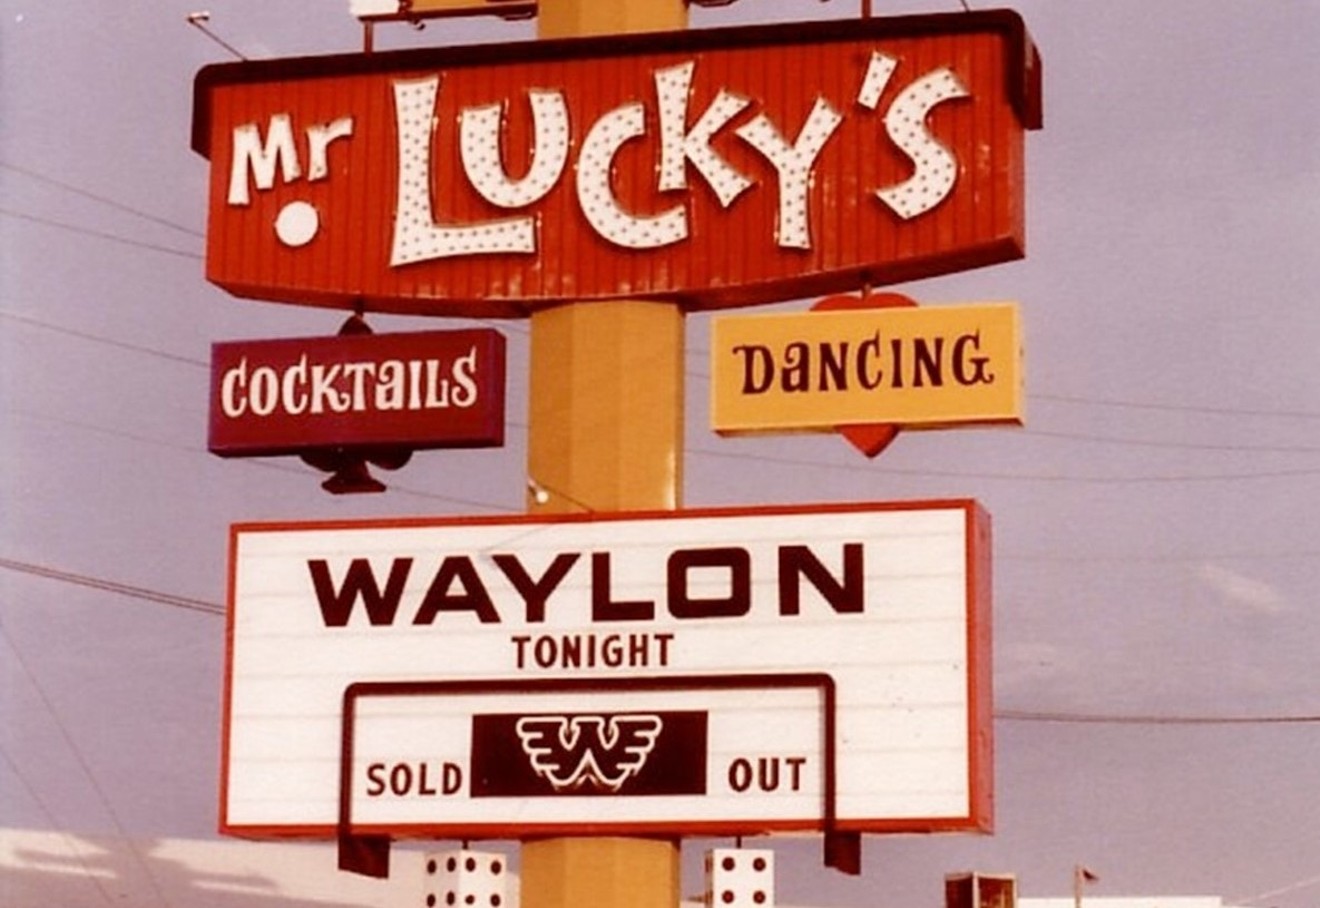 The sign outside of Mr. Lucky's on the night in 1980 when Waylon Jennings recorded his ABC television special at the nightclub.